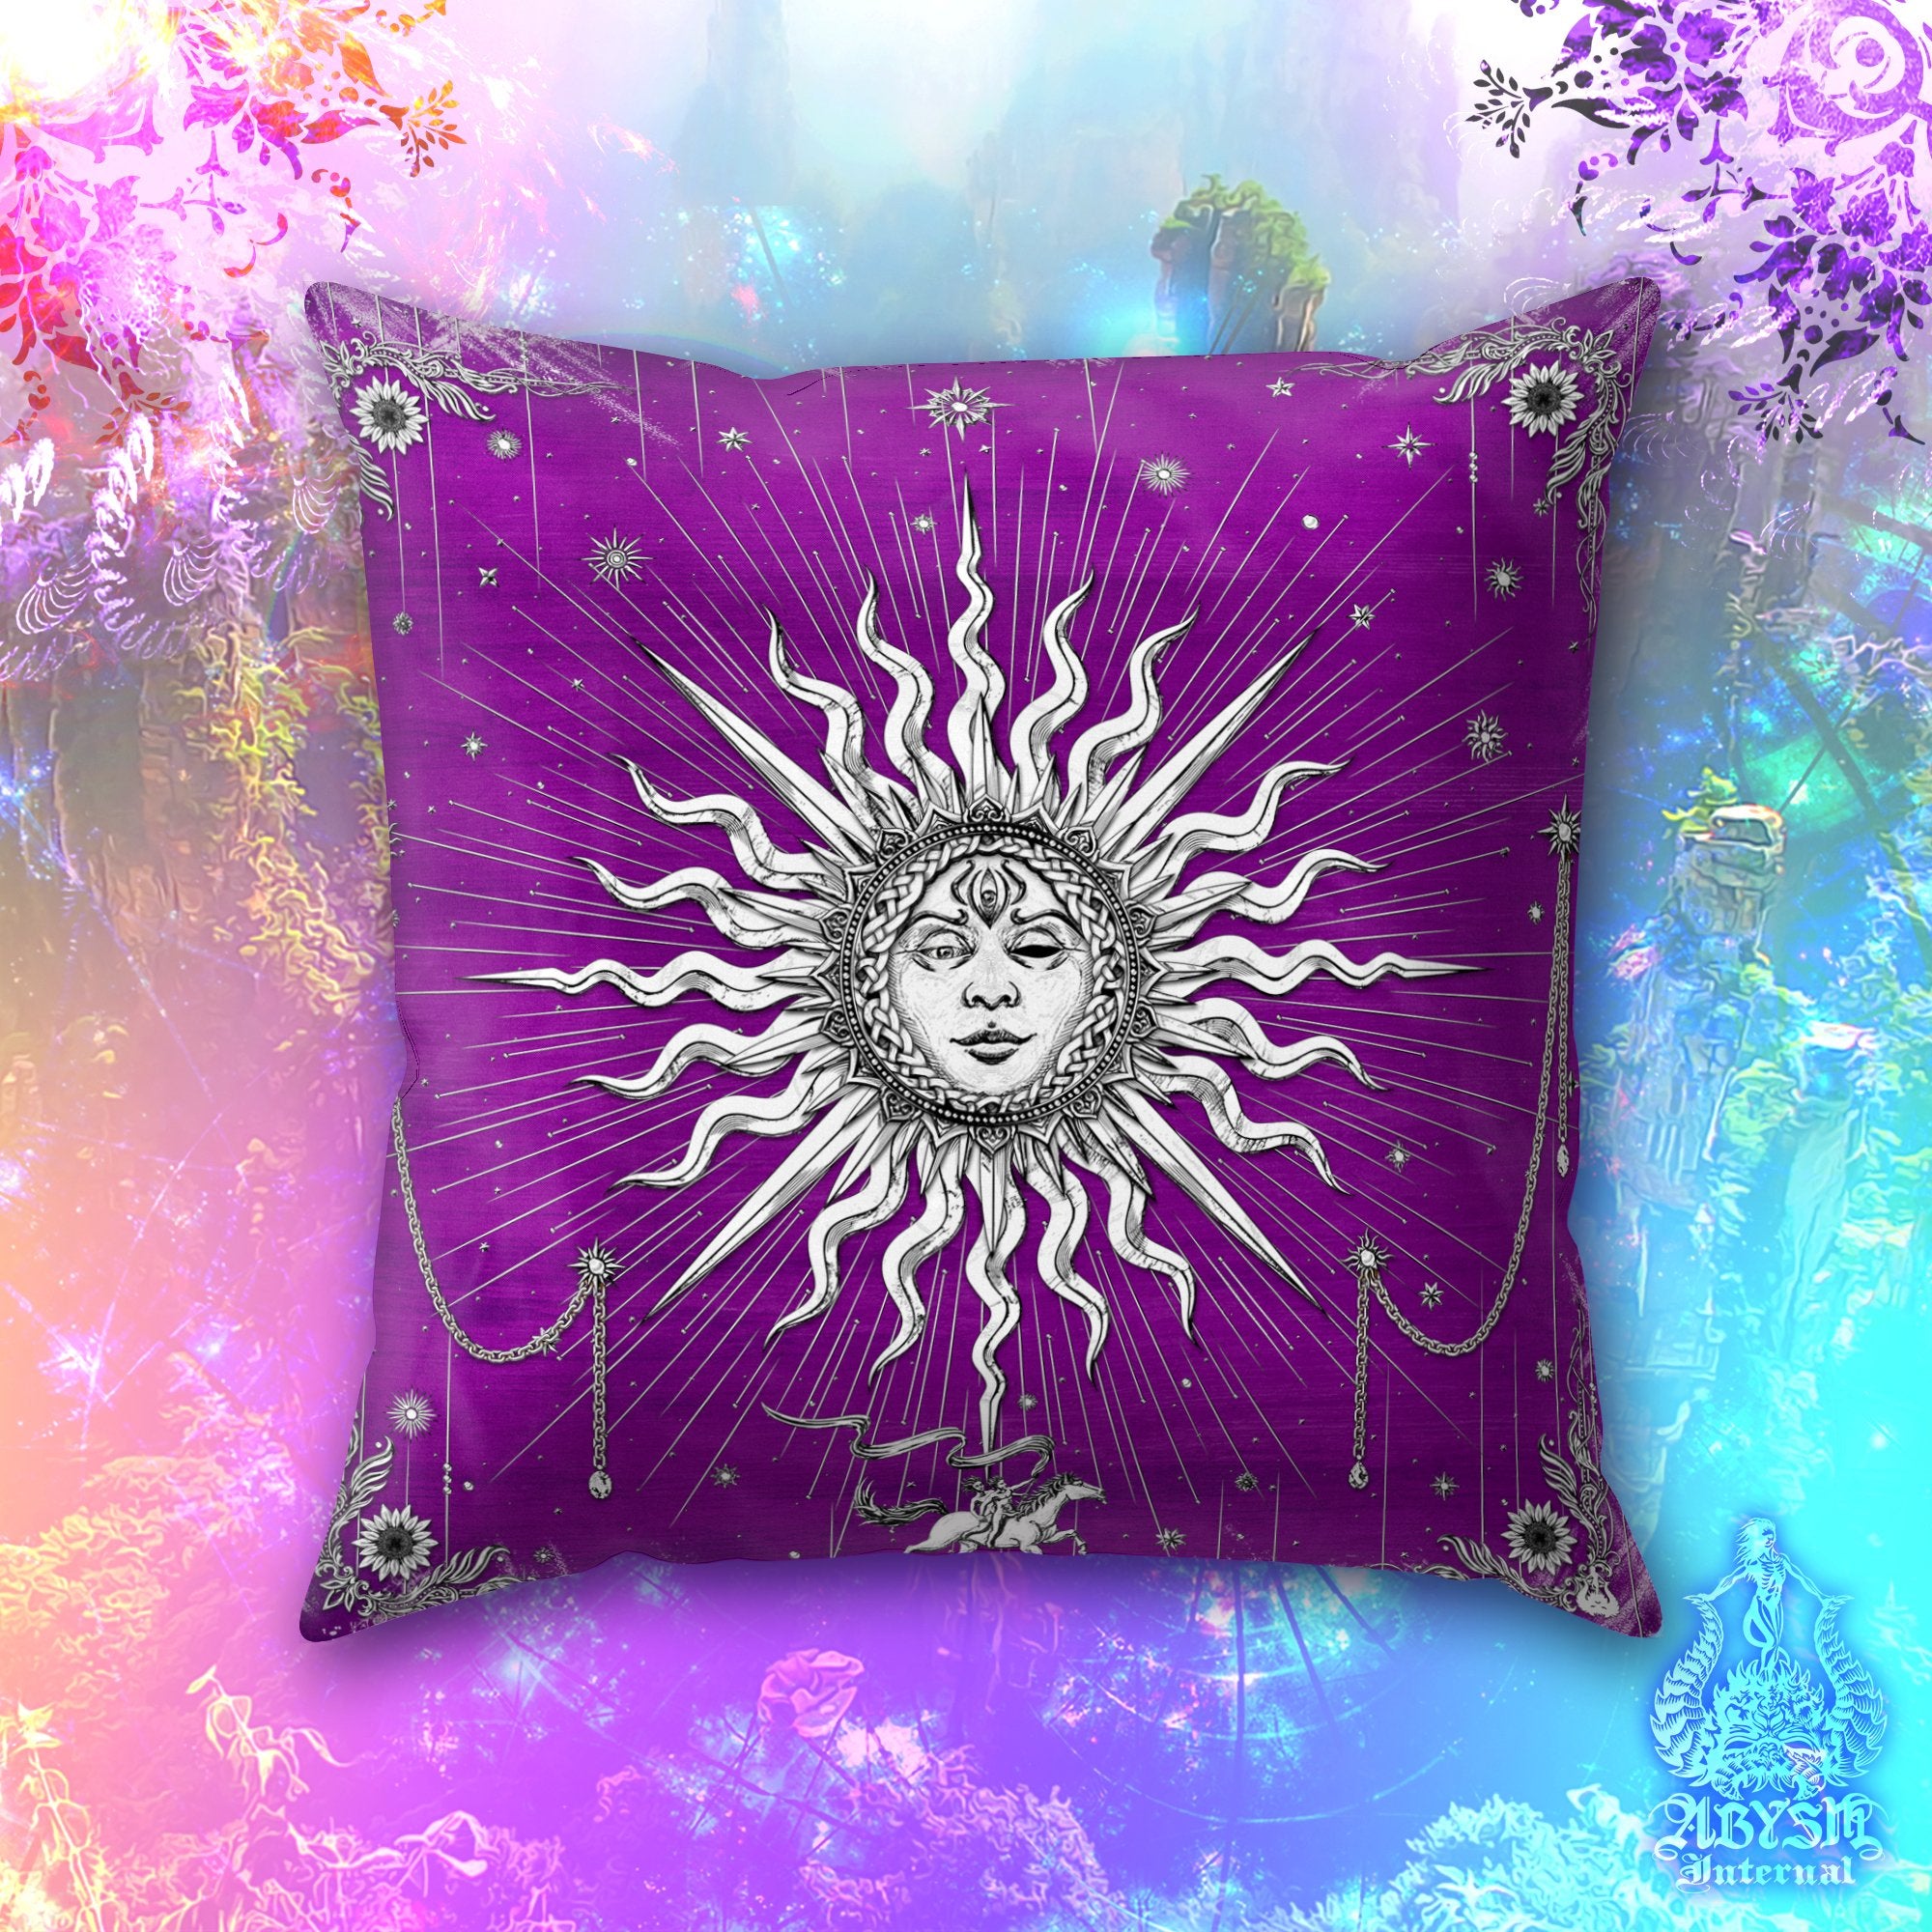 White Sun Throw Pillow, Boho Decorative Accent Pillow, Square Cushion Cover, Arcana Tarot Art, Indie Home, Fortune & Magic Room Decor - Paper, 6 Colors - Abysm Internal